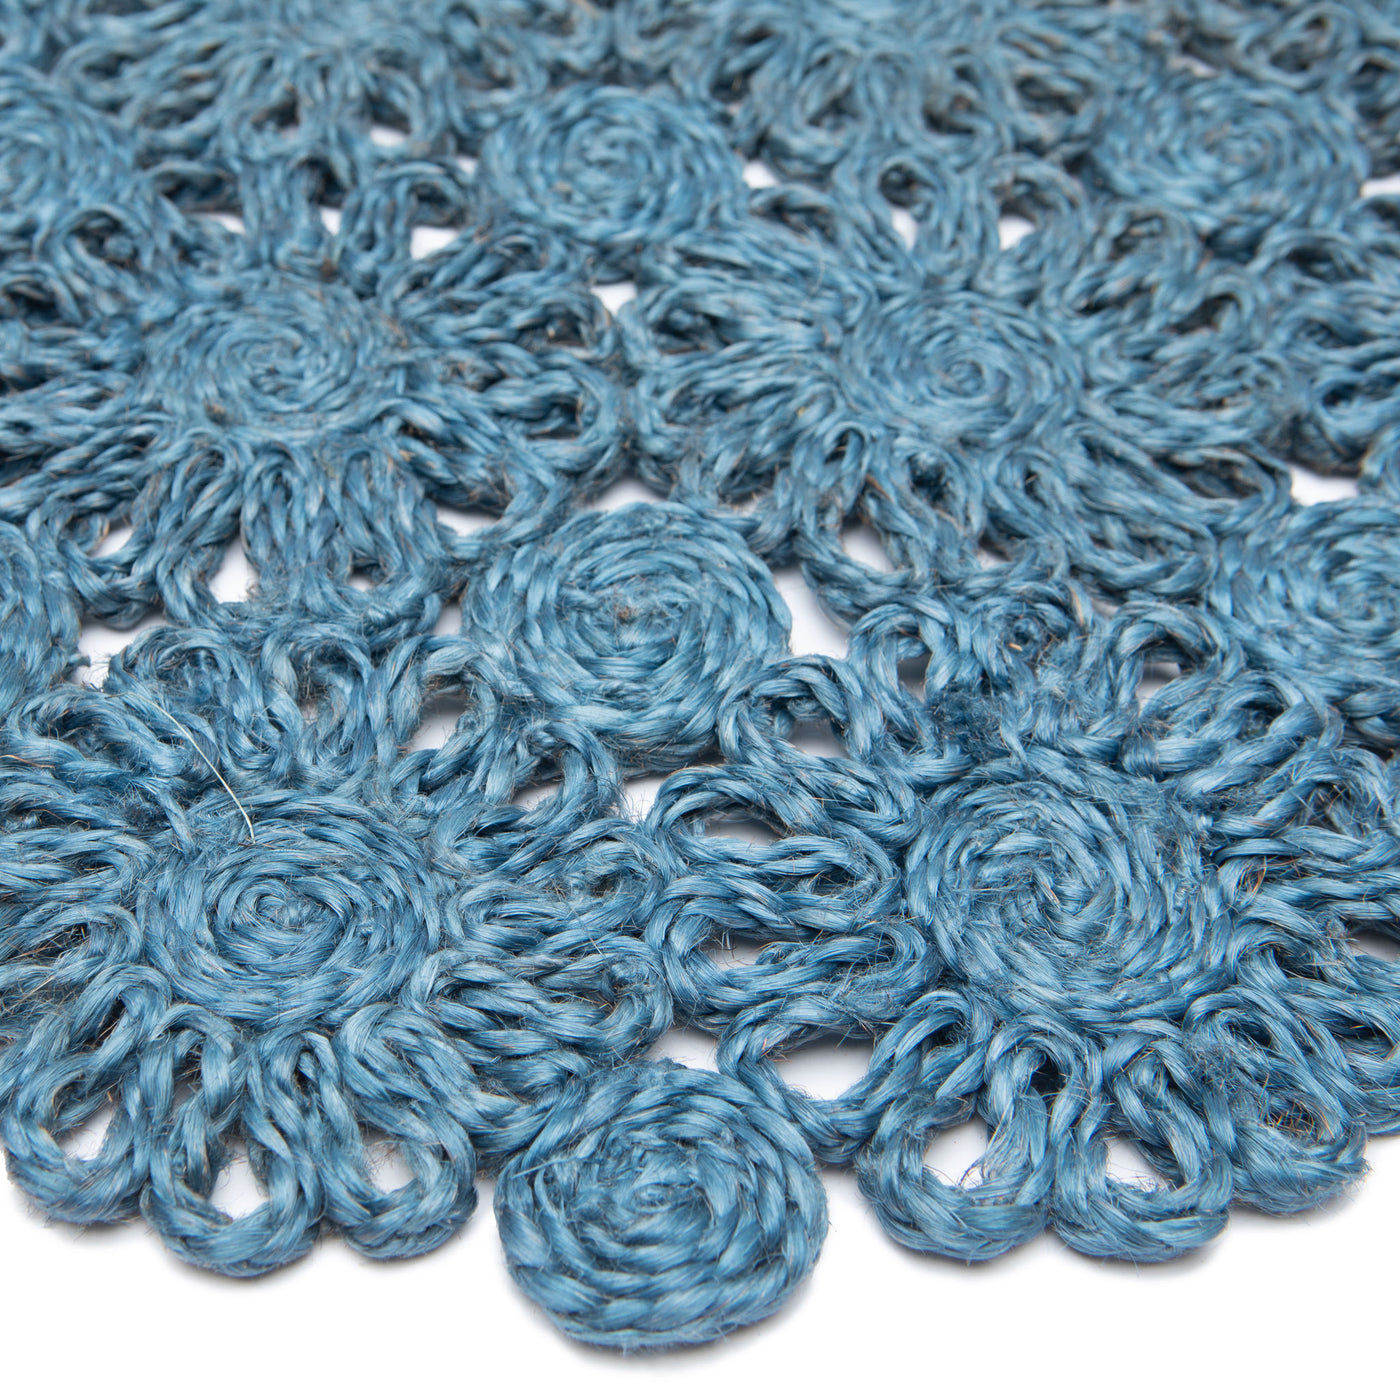 Daisy Jute Blue Jean Placemat 15" Round - Set of 4